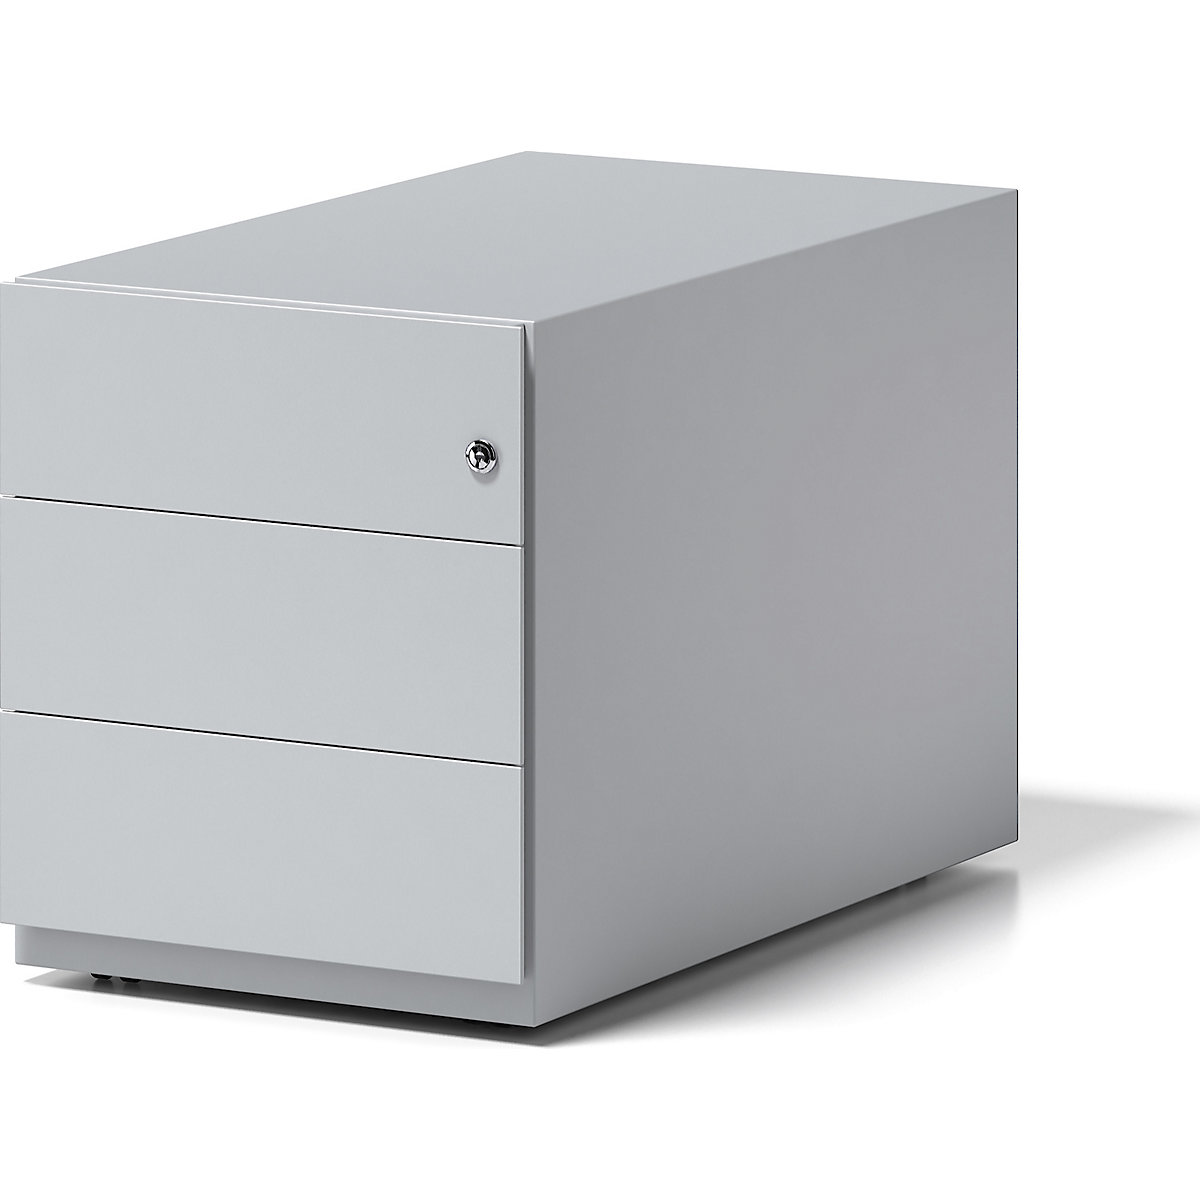 BISLEY – Note™ mobile drawer unit, with 3 universal drawers